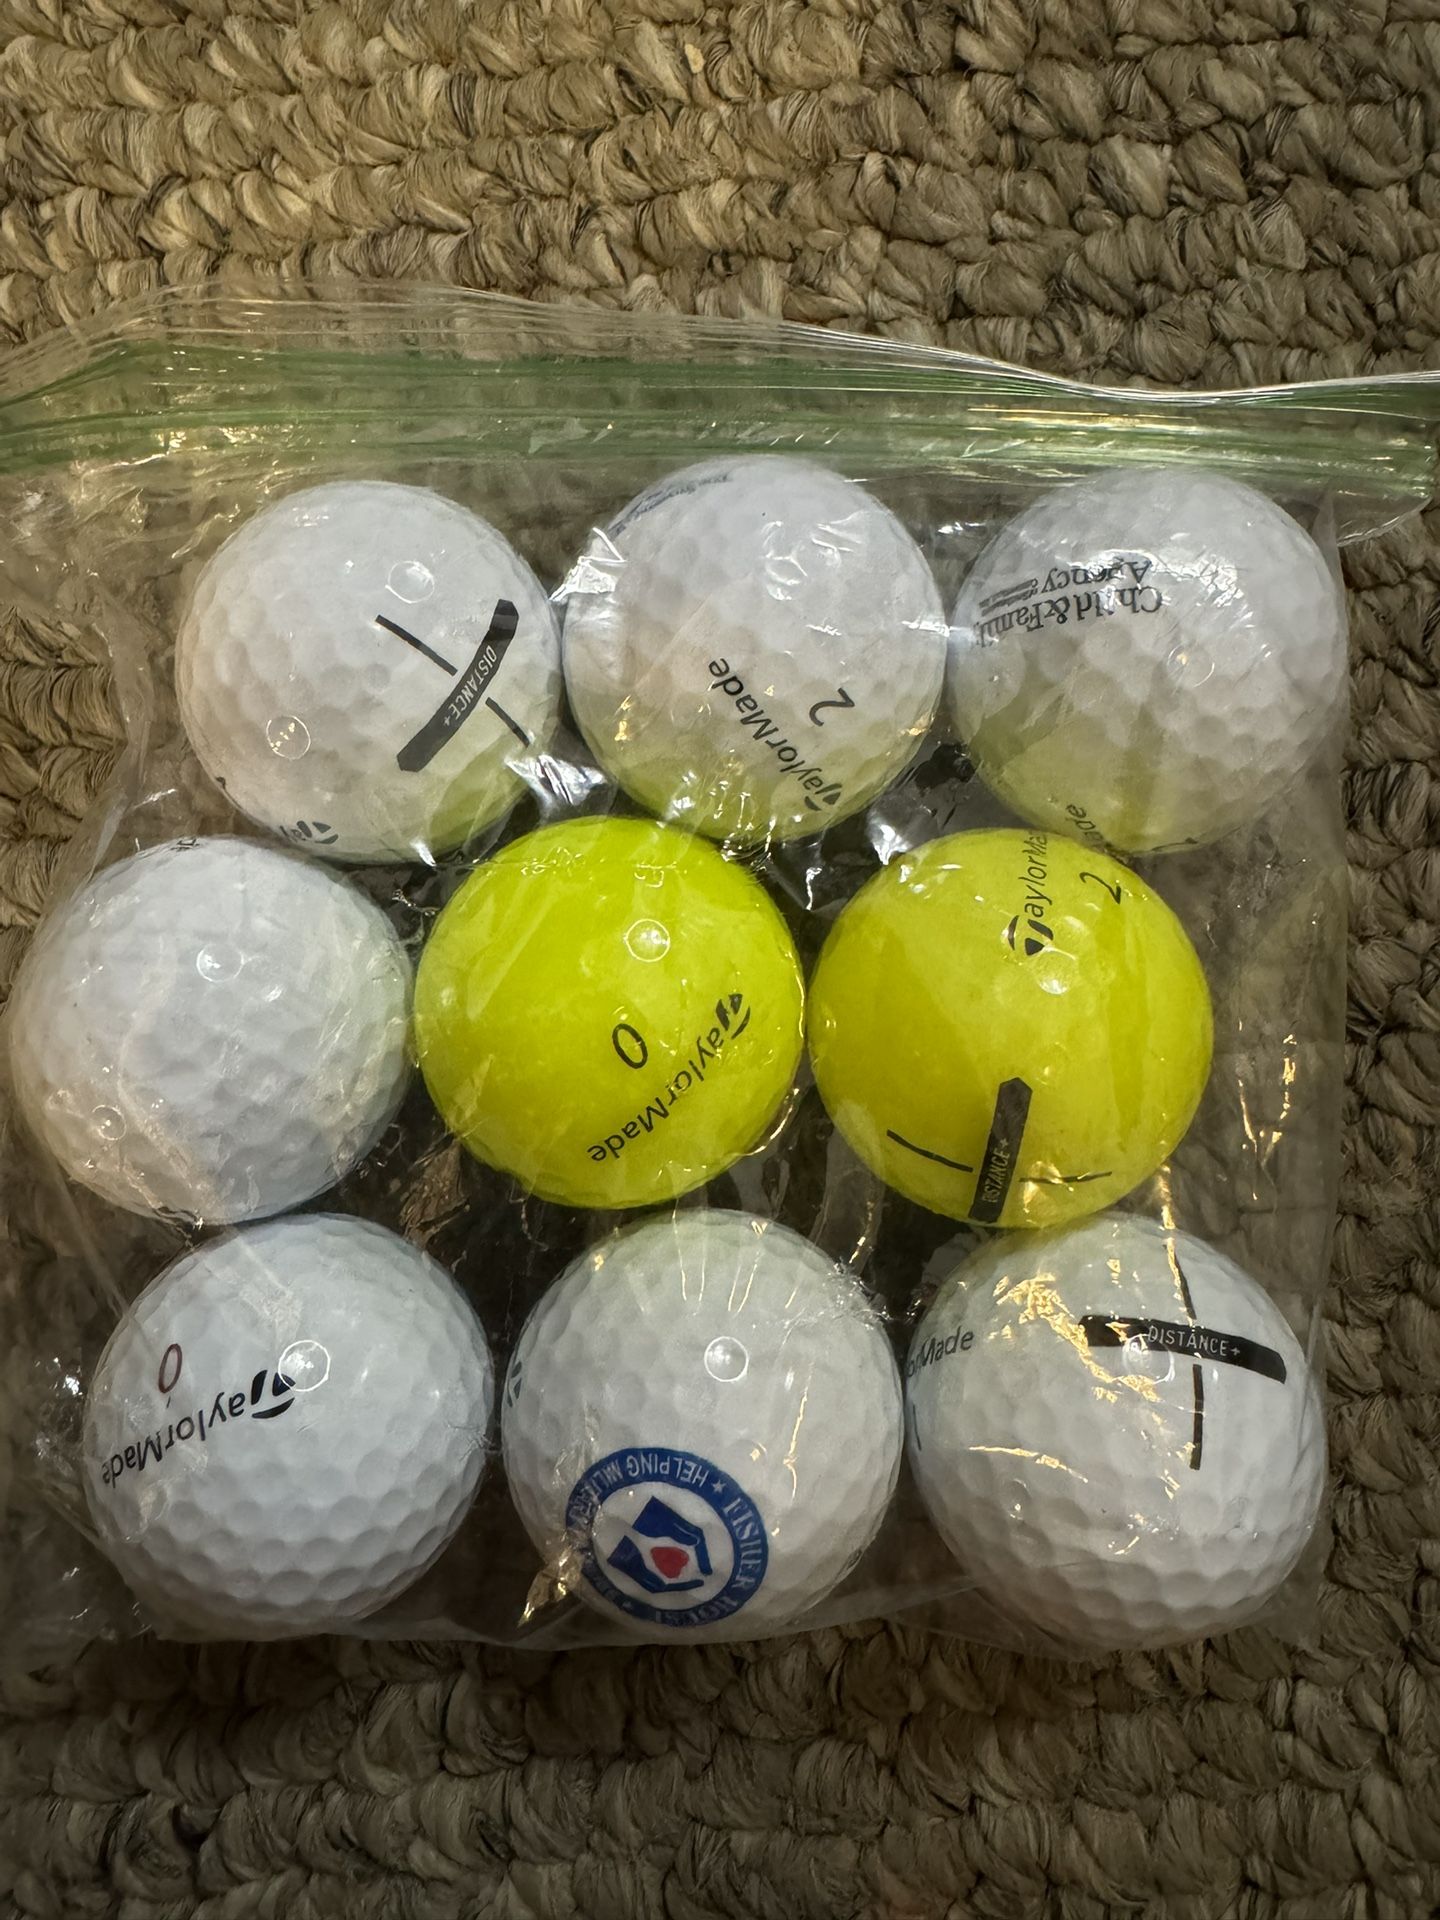 Used Taylormade distance Balls